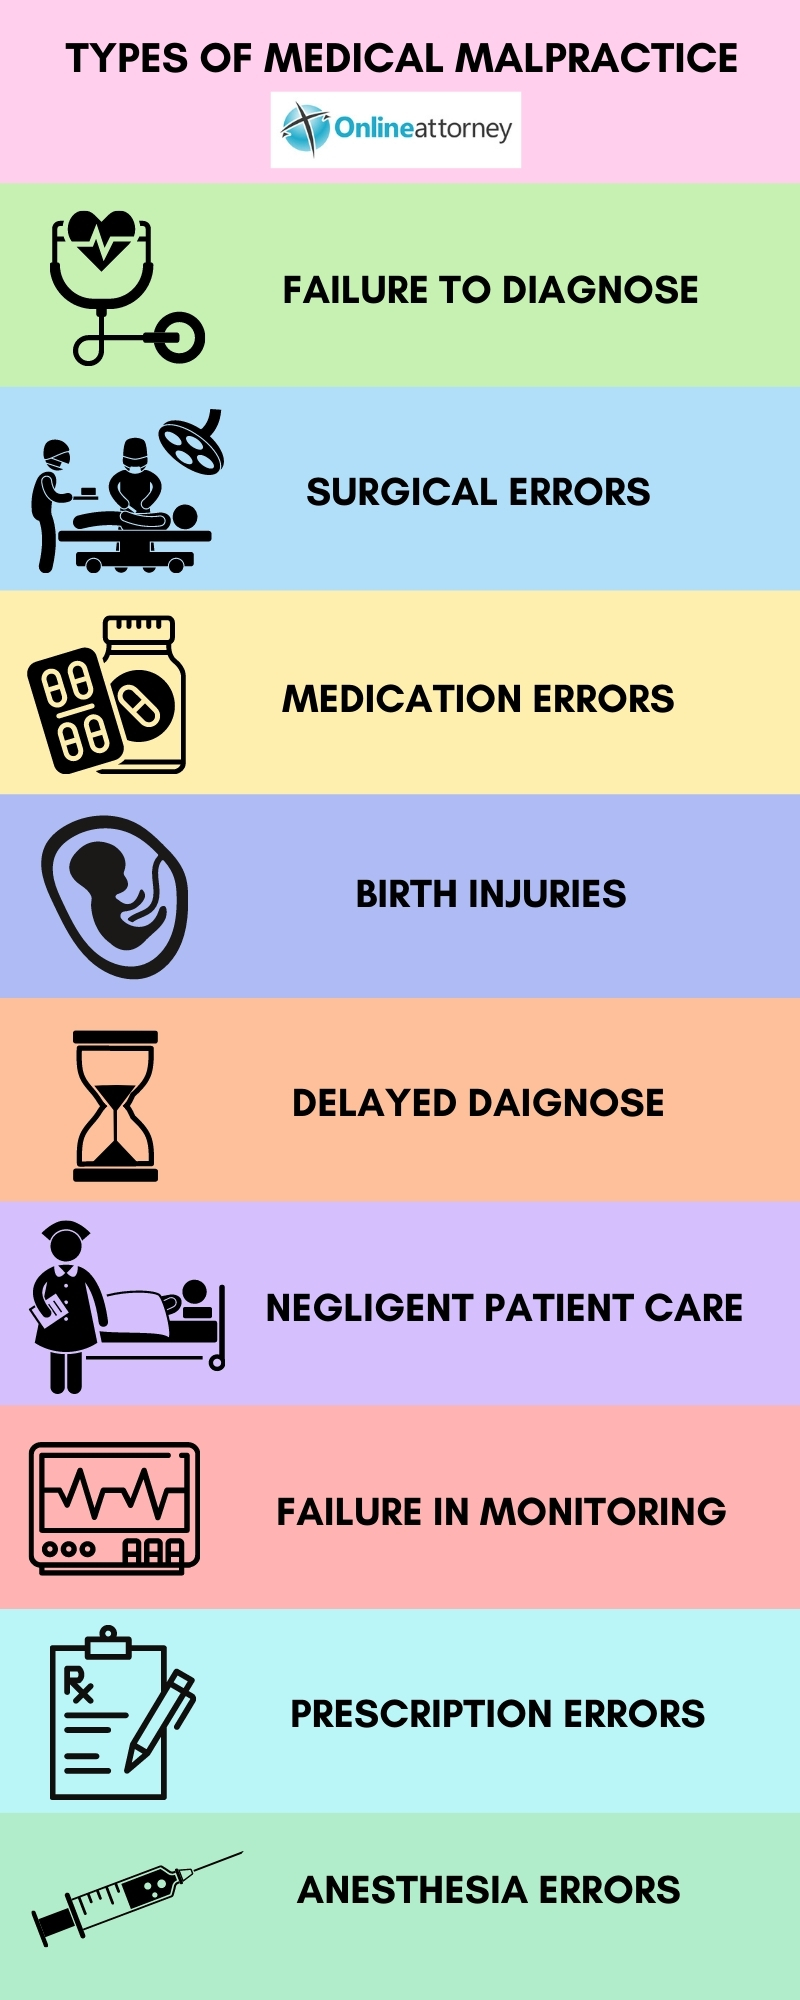 Types of medical malpractice